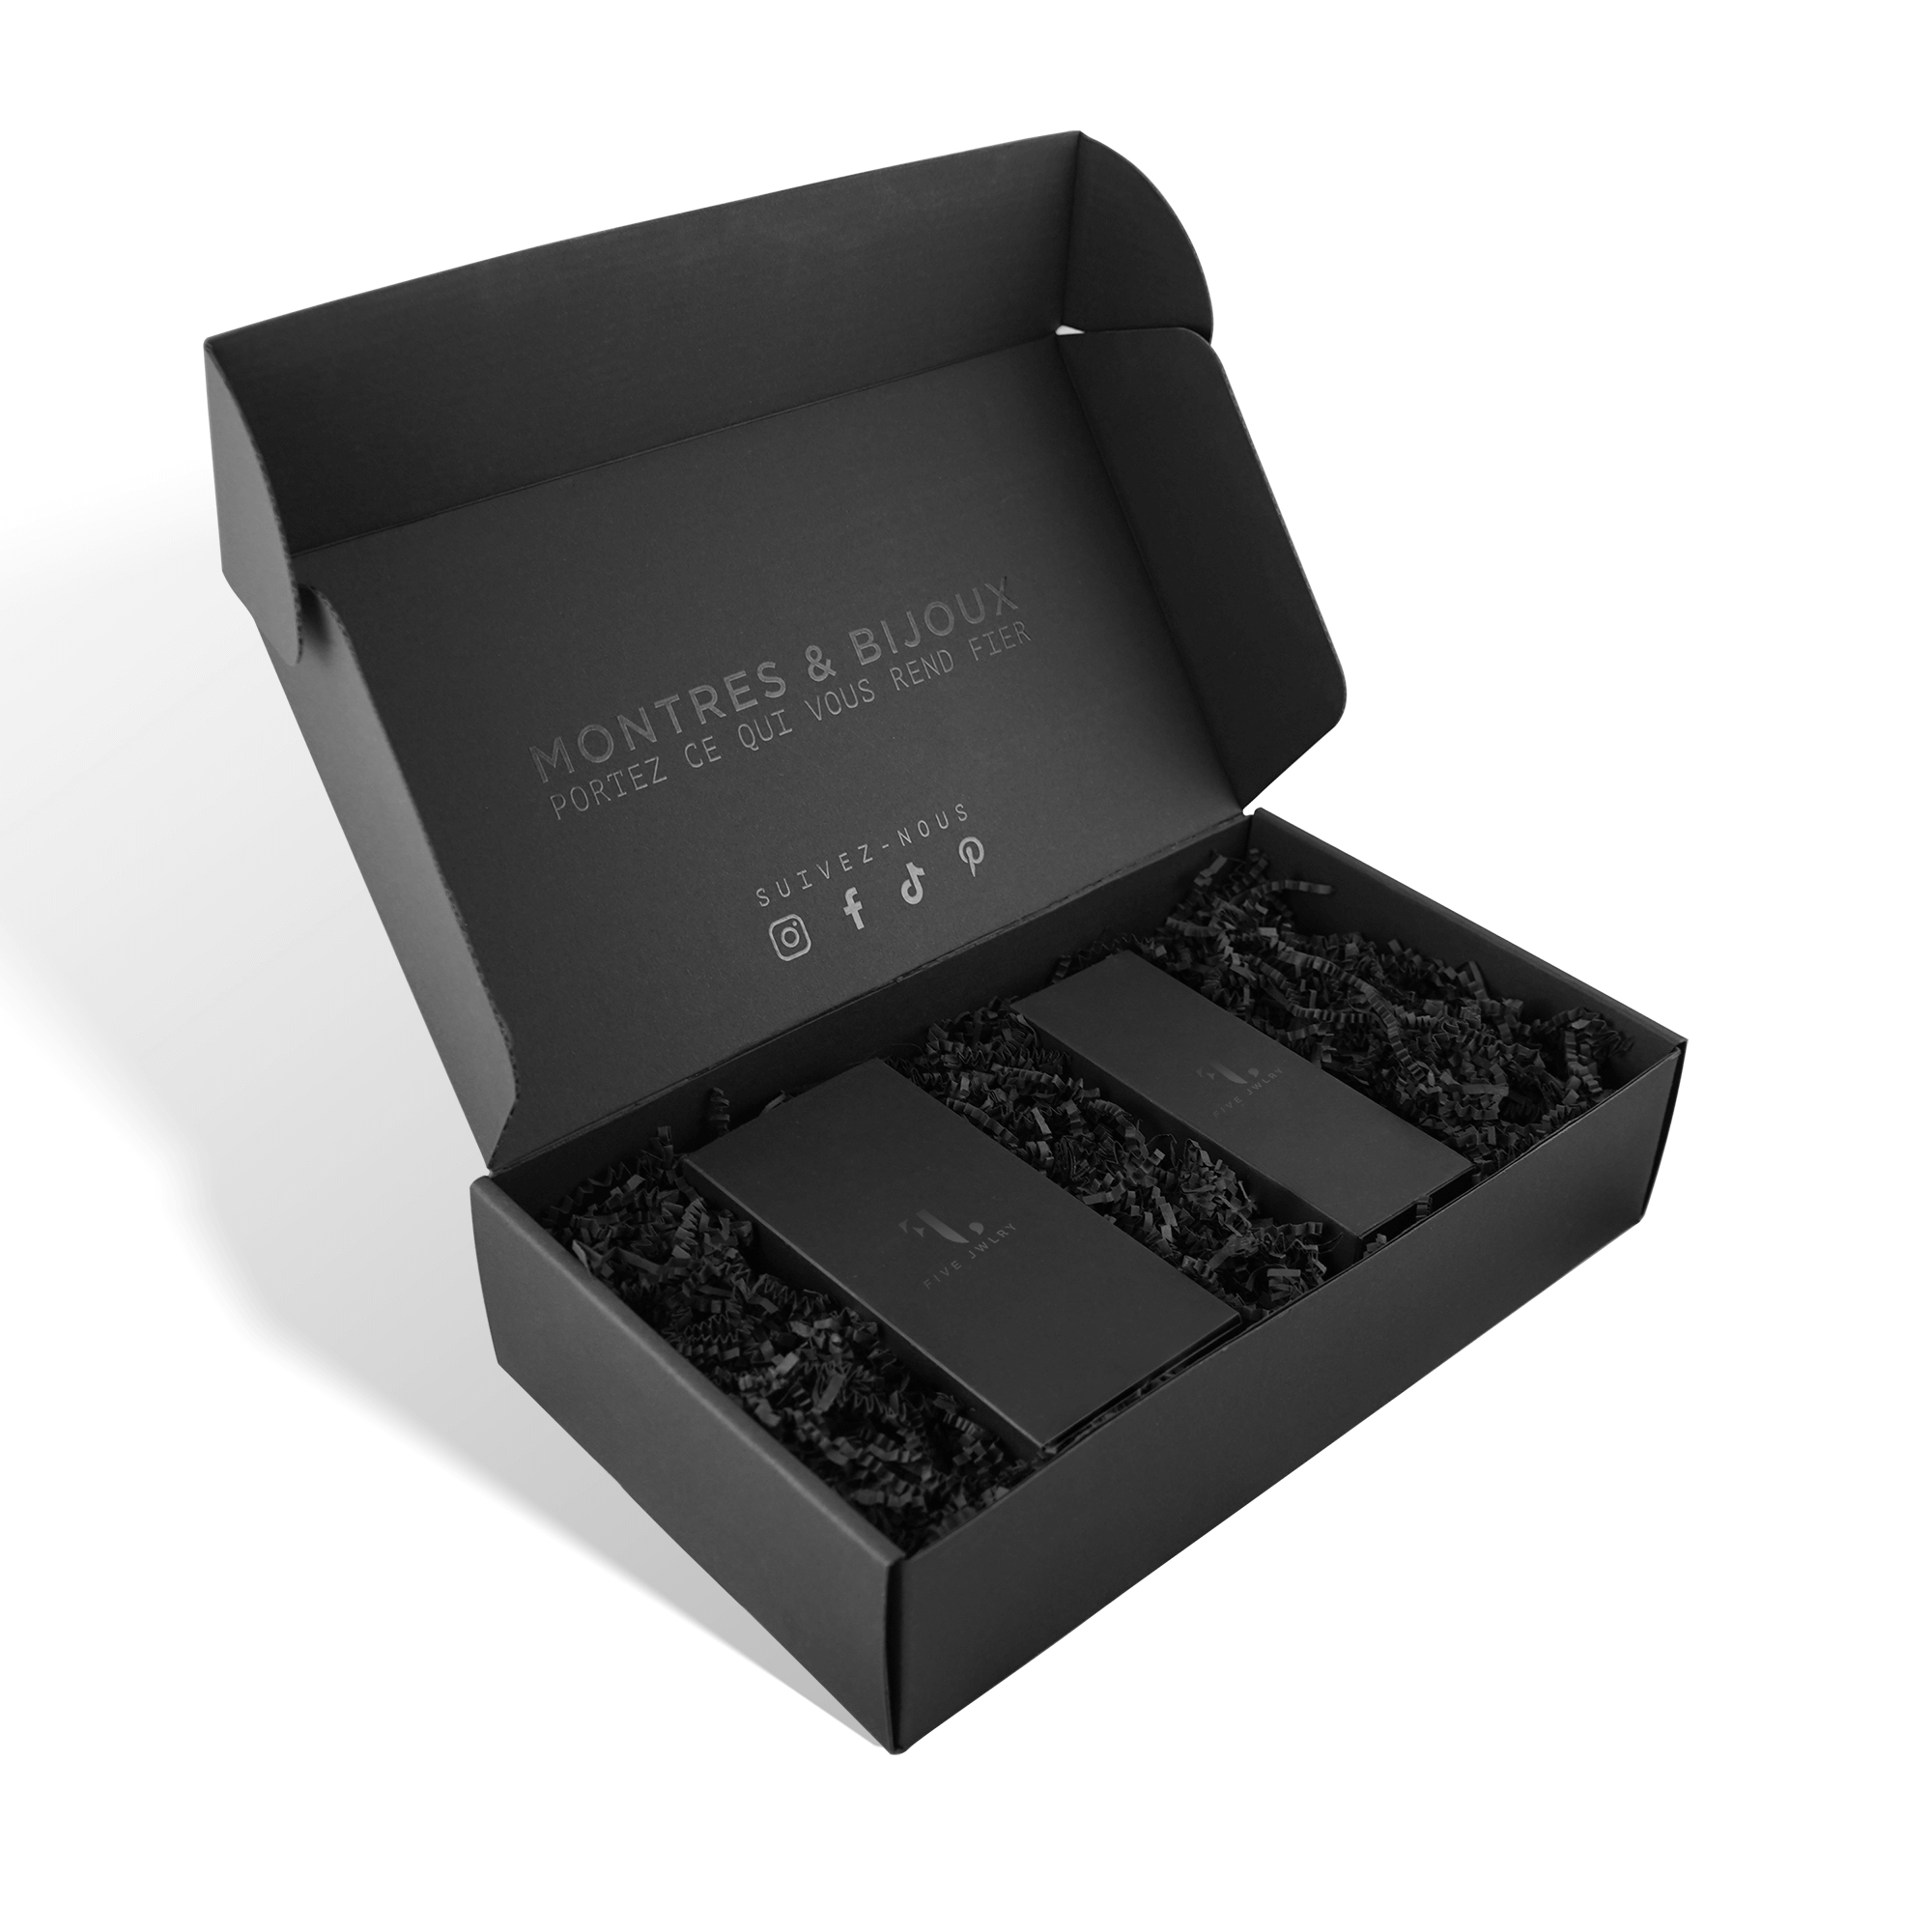 Holiday Watch Set Box by Five Jwlry. A perfect Christmas gift set featuring a stylish watch with two interchangeable bracelets, offering versatility and elegance for the festive season.